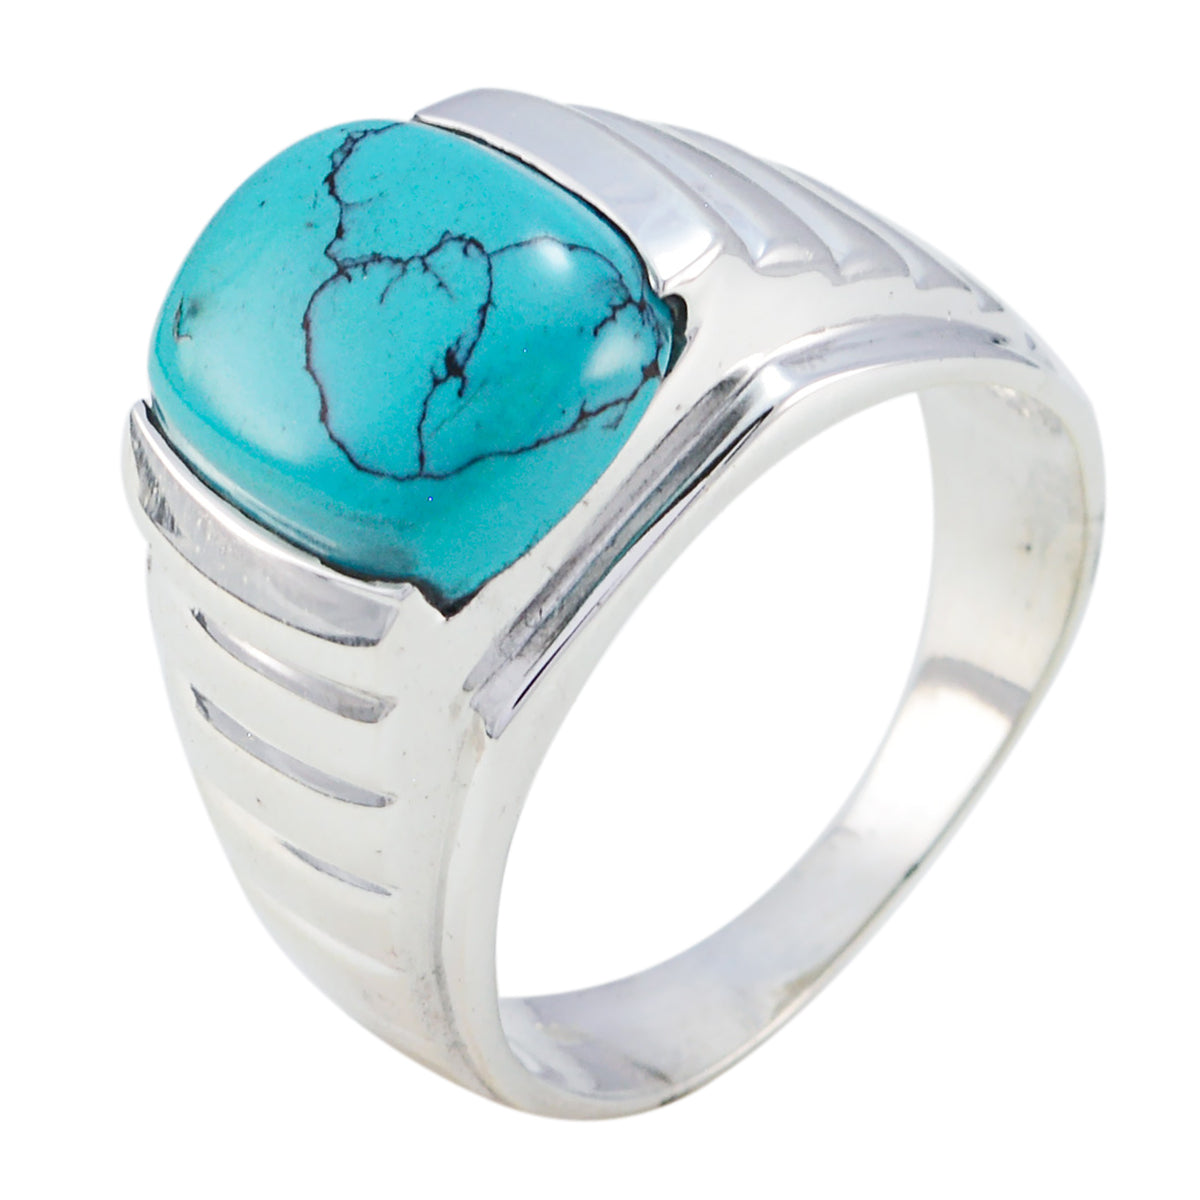 Resplendent Gem Turquoise Sterling Silver Ring Personalized Jewellery